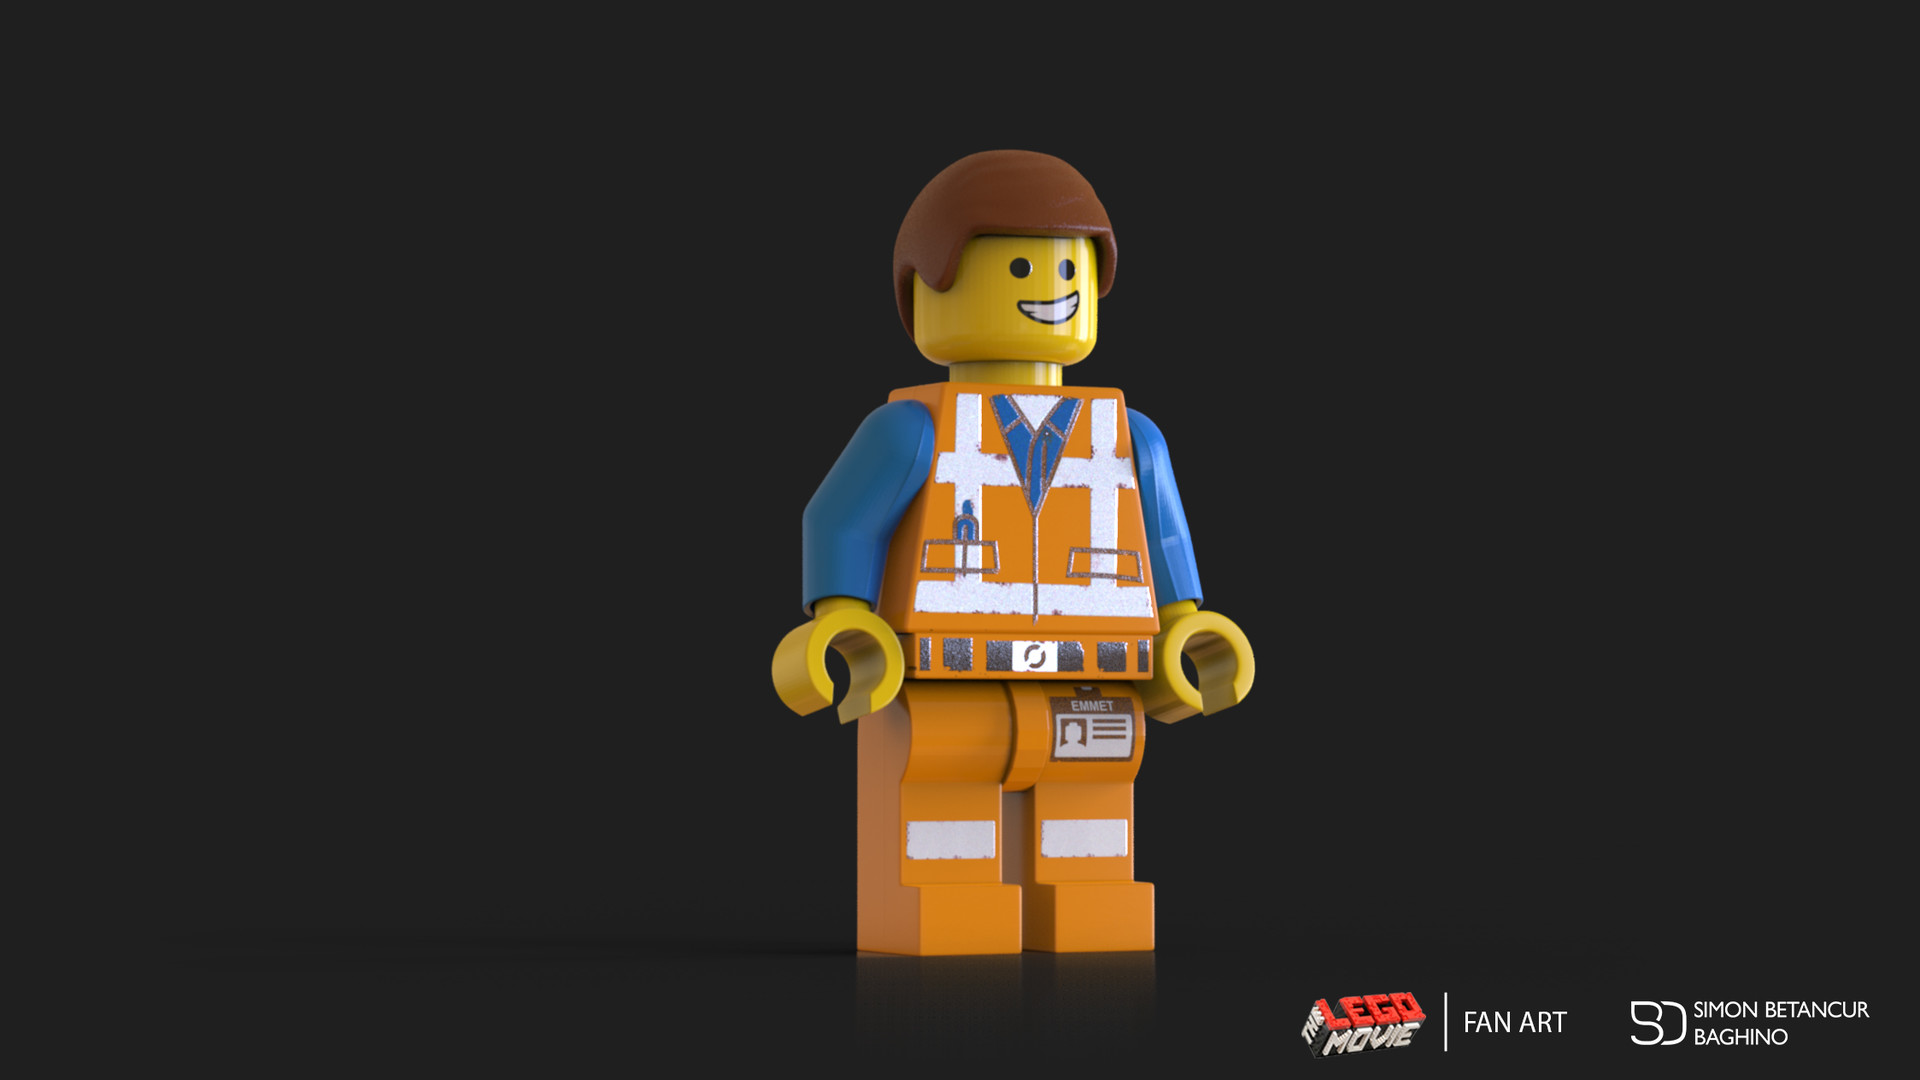 Simon Betancur Baghino - Emmet from THE LEGO MOVIE fan art.